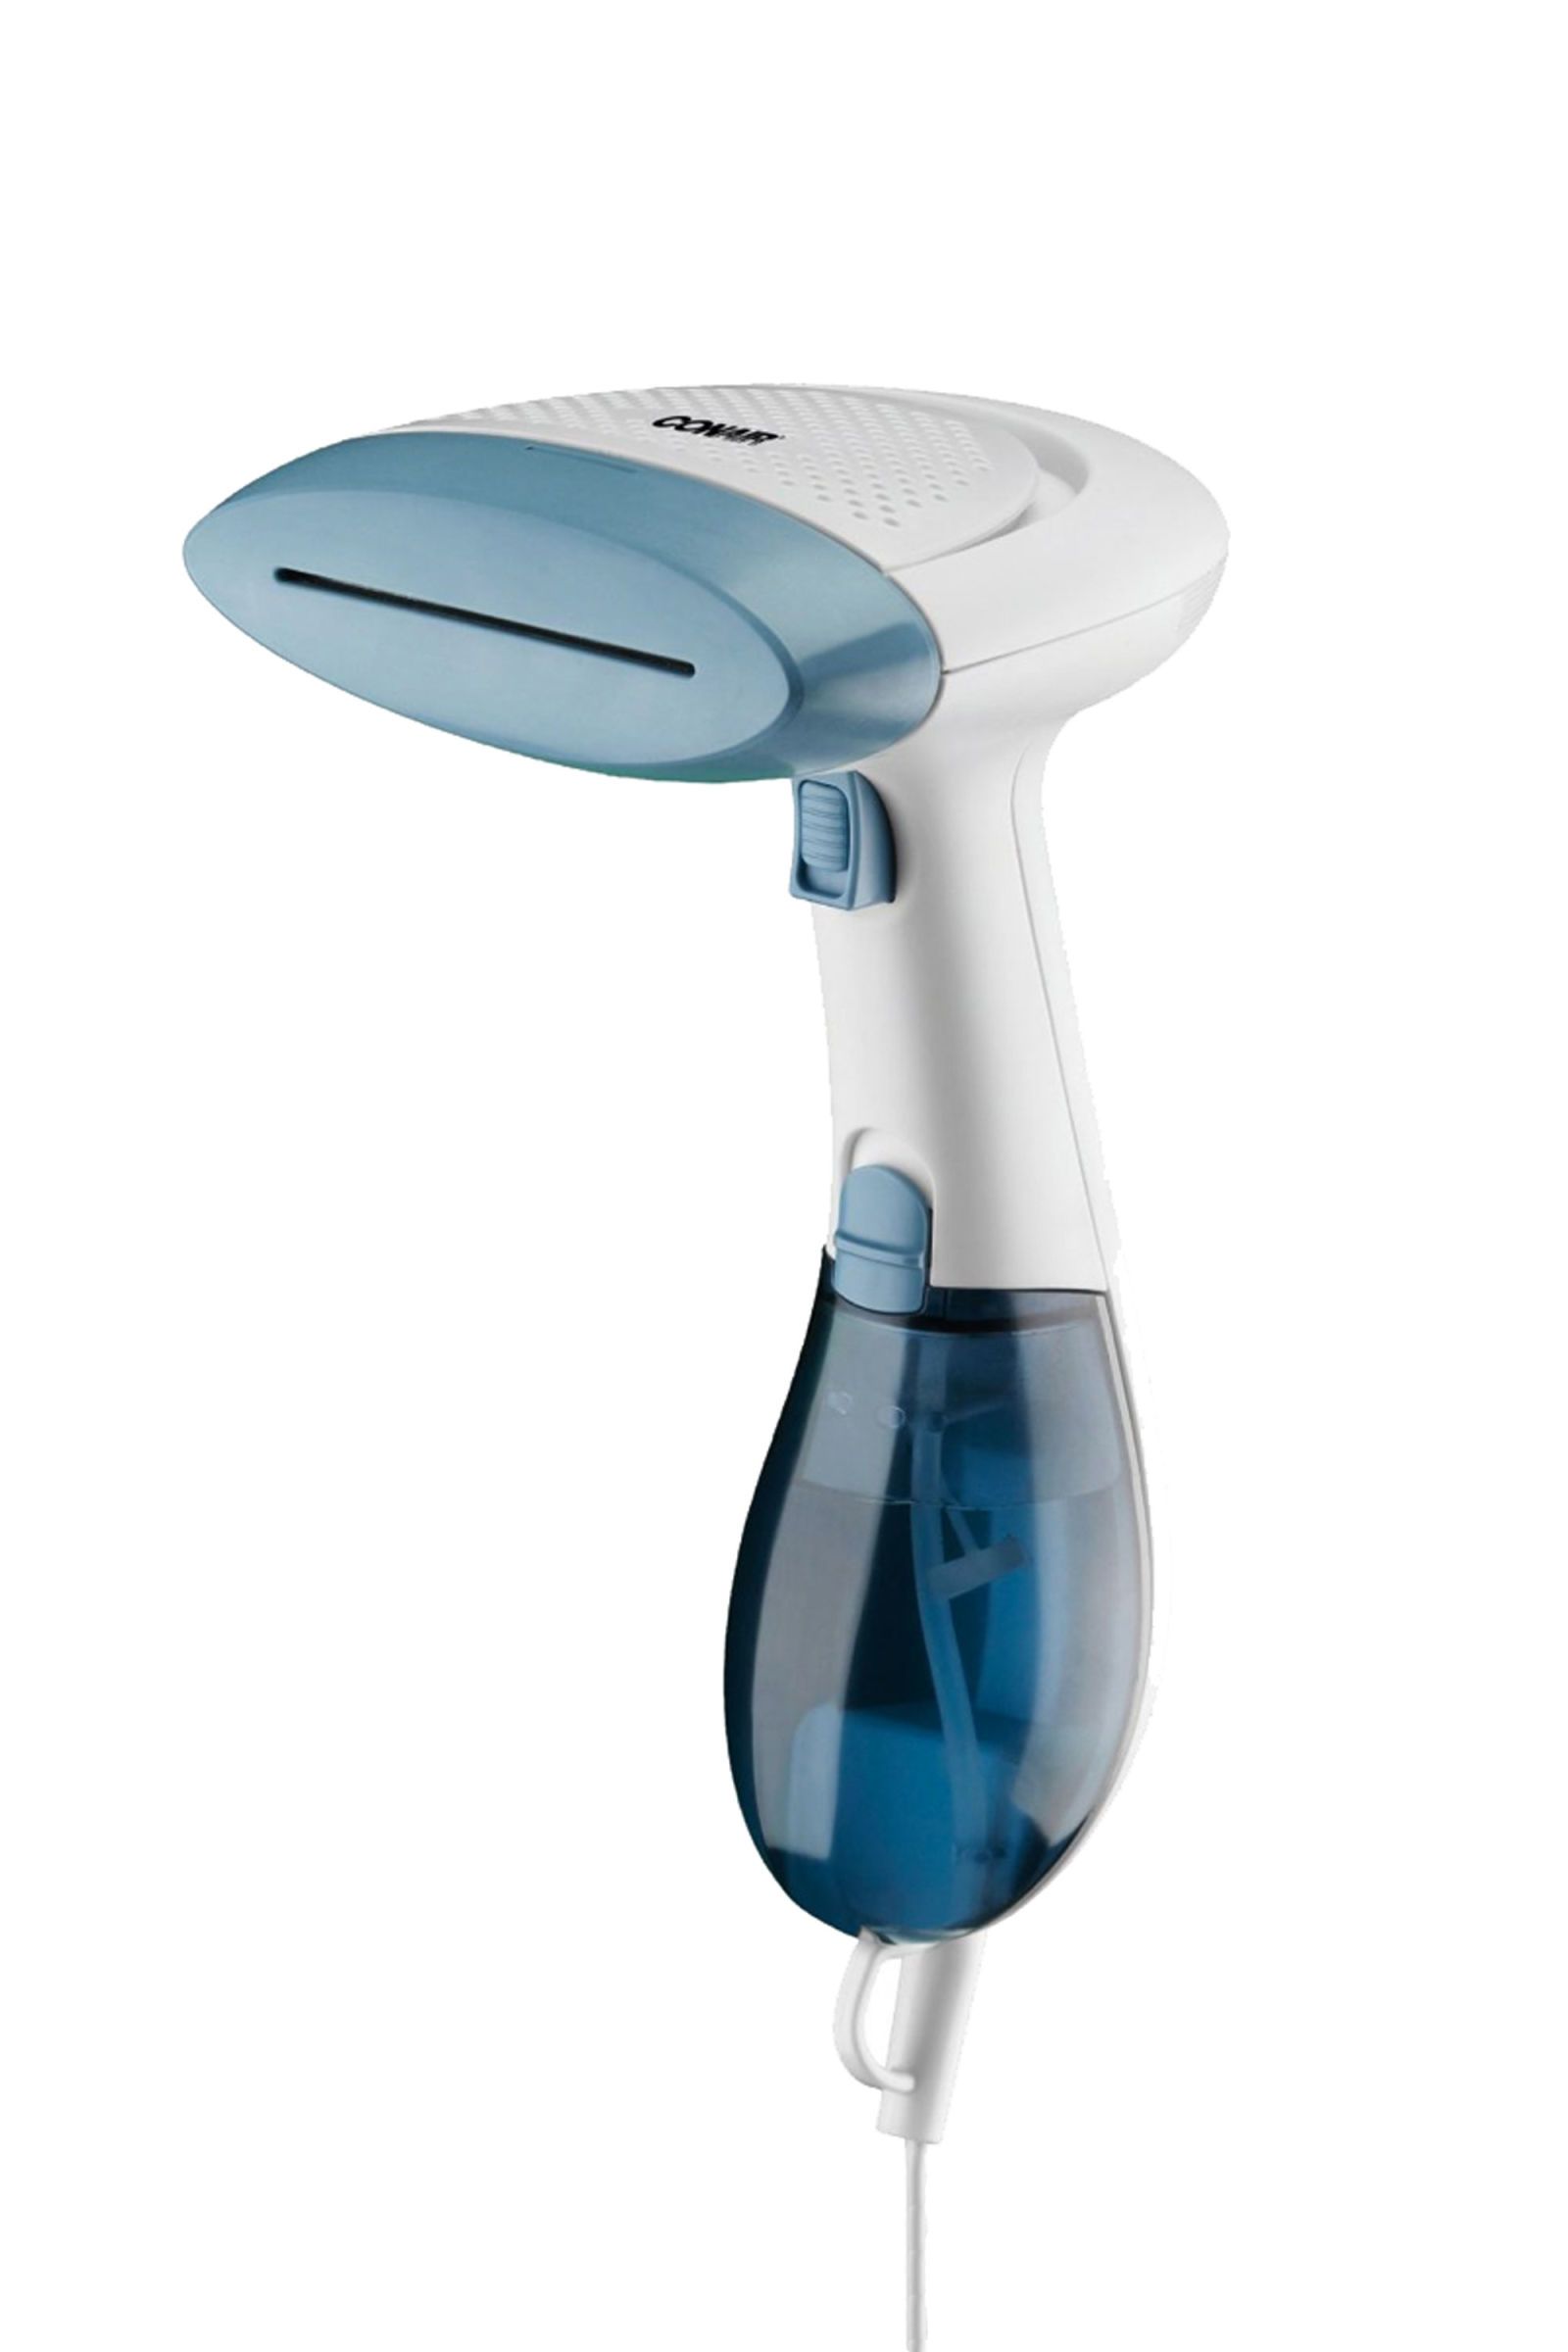 Vertical Steaming Capability: Refresh Garments Quickly with the Conair ExtremeSteam Handheld Fabric Steamer